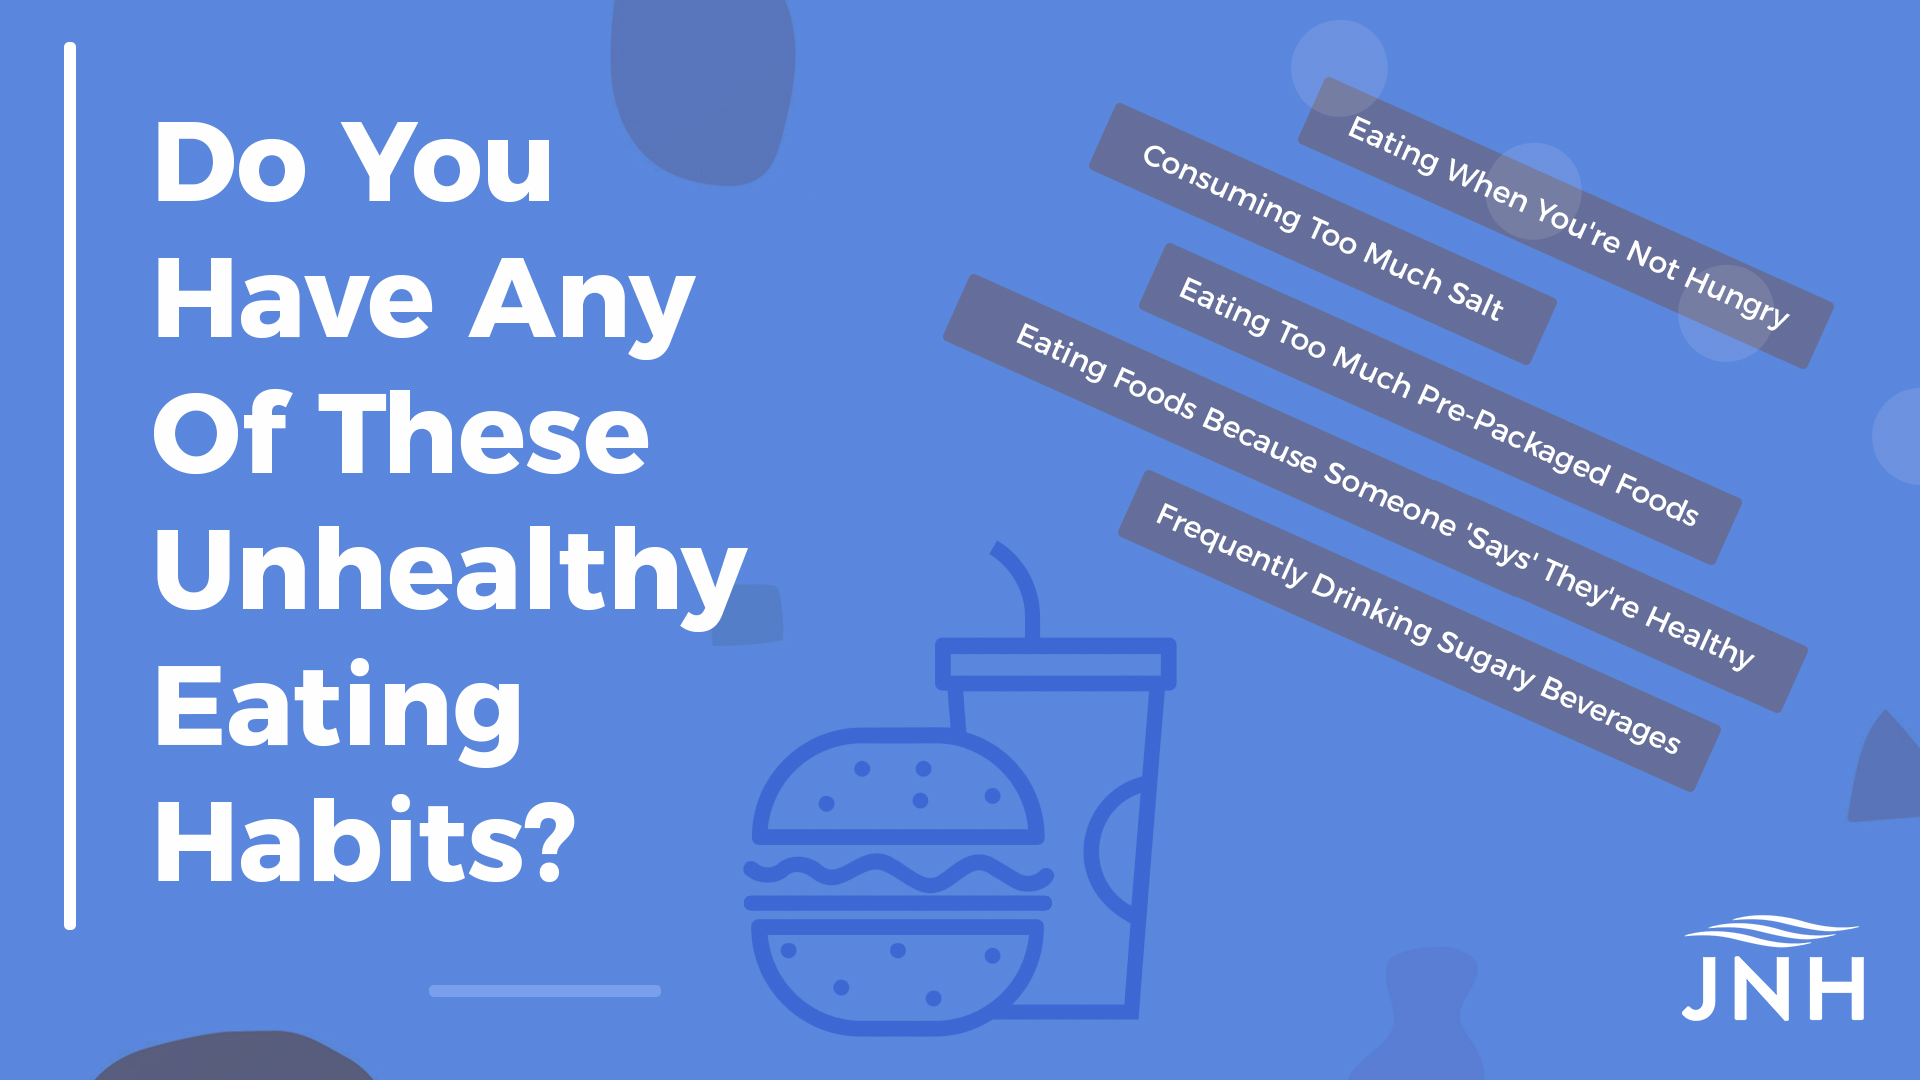 Do You Have Any Of These Unhealthy Eating Habits? 1. Eating When You're Not Hungry 2. Consuming Too Much Salt 3. Eating Foods Because Someone 'Says' They're Healthy 4. Eating Too Much Pre-Packaged Foods 5. Frequently Drinking Sugary Beverages